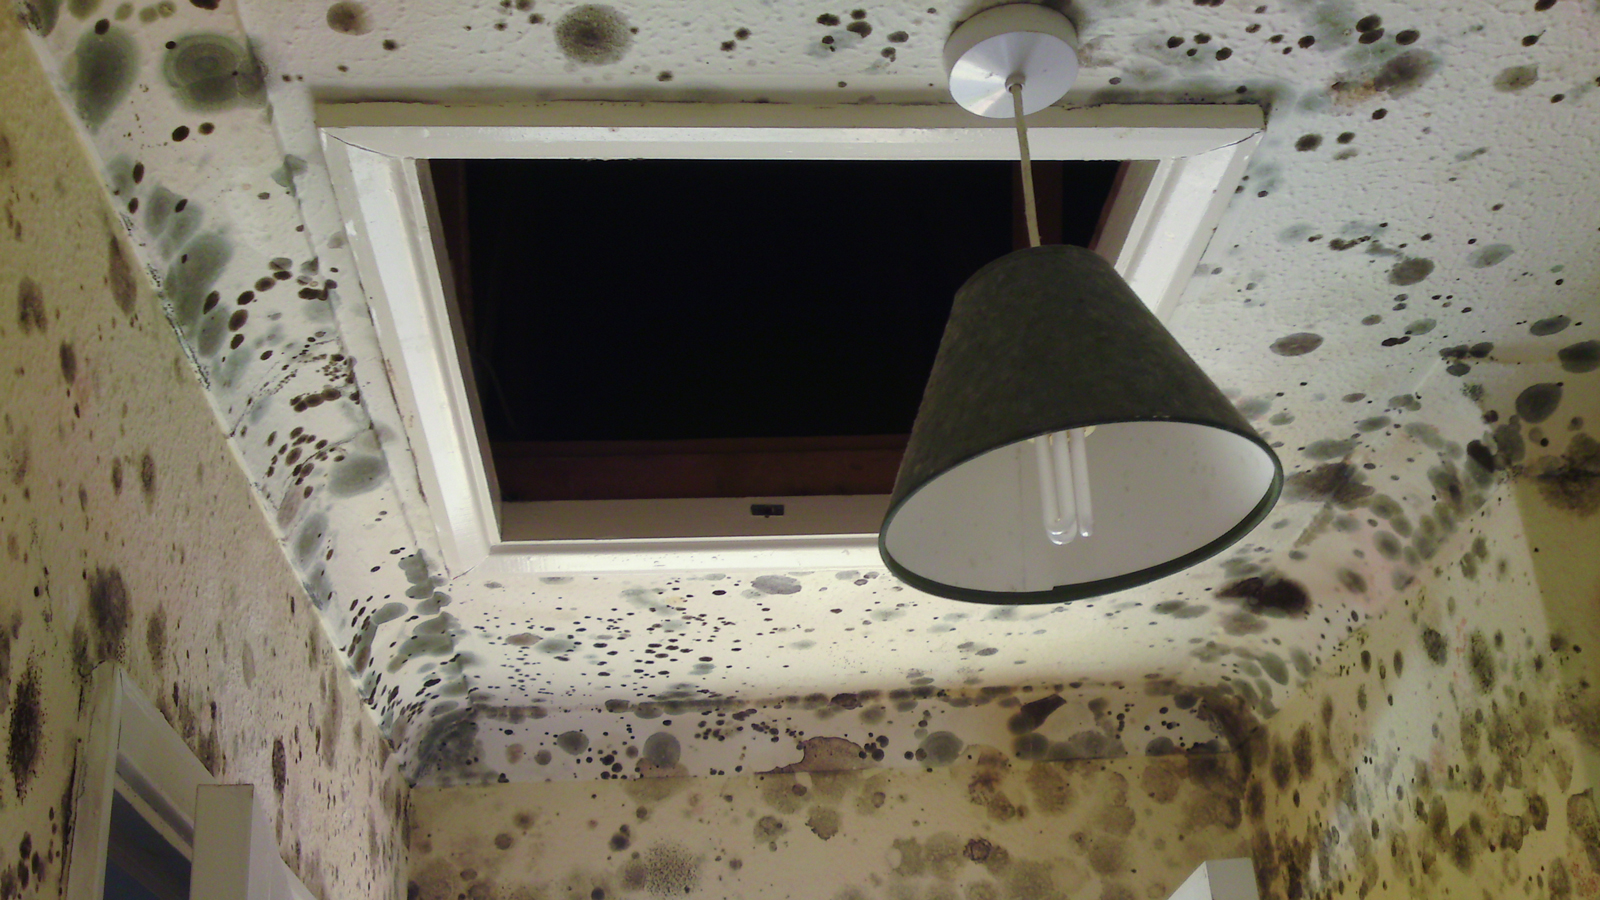 Follow these steps if you've found black mold in your home to keep